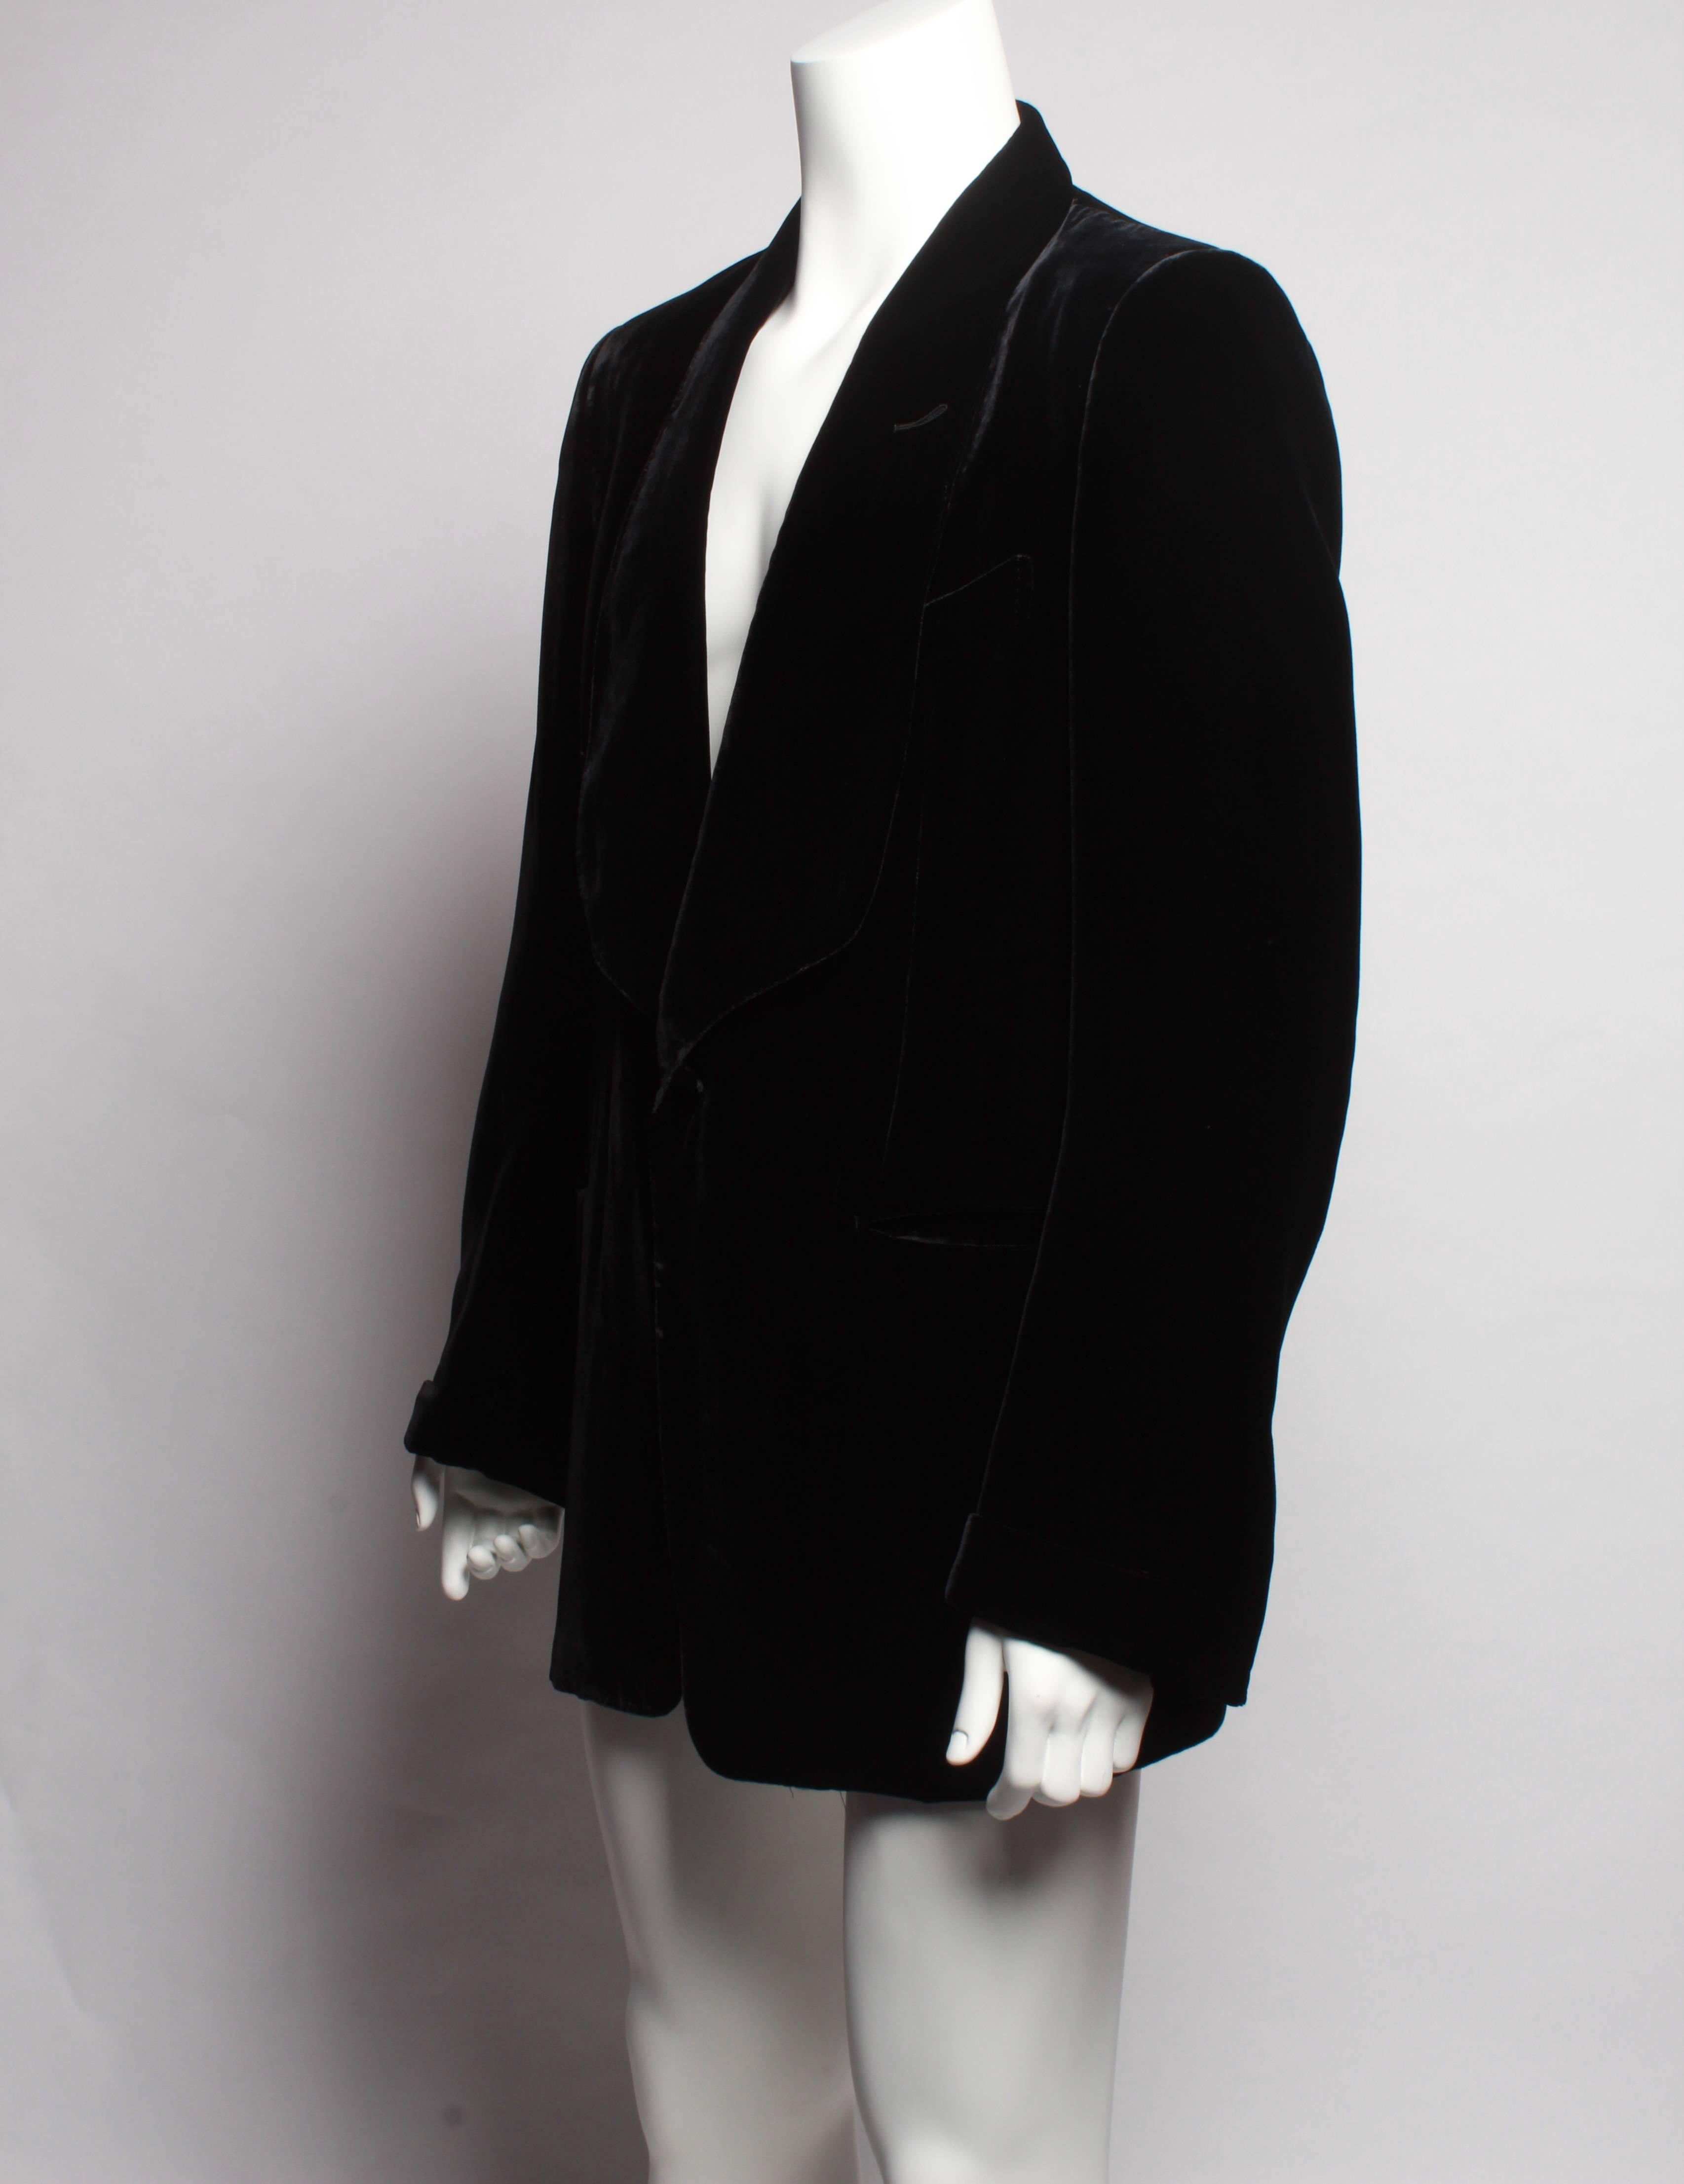 Stunning TOM FORD evening cocktail jacket in liquid silk velvet. In pristine condition this jacket has never been worn. The jacket features a beautiful large dinner collar, two outer pockets, still sewn and delightful back split.
Made in Switzerland